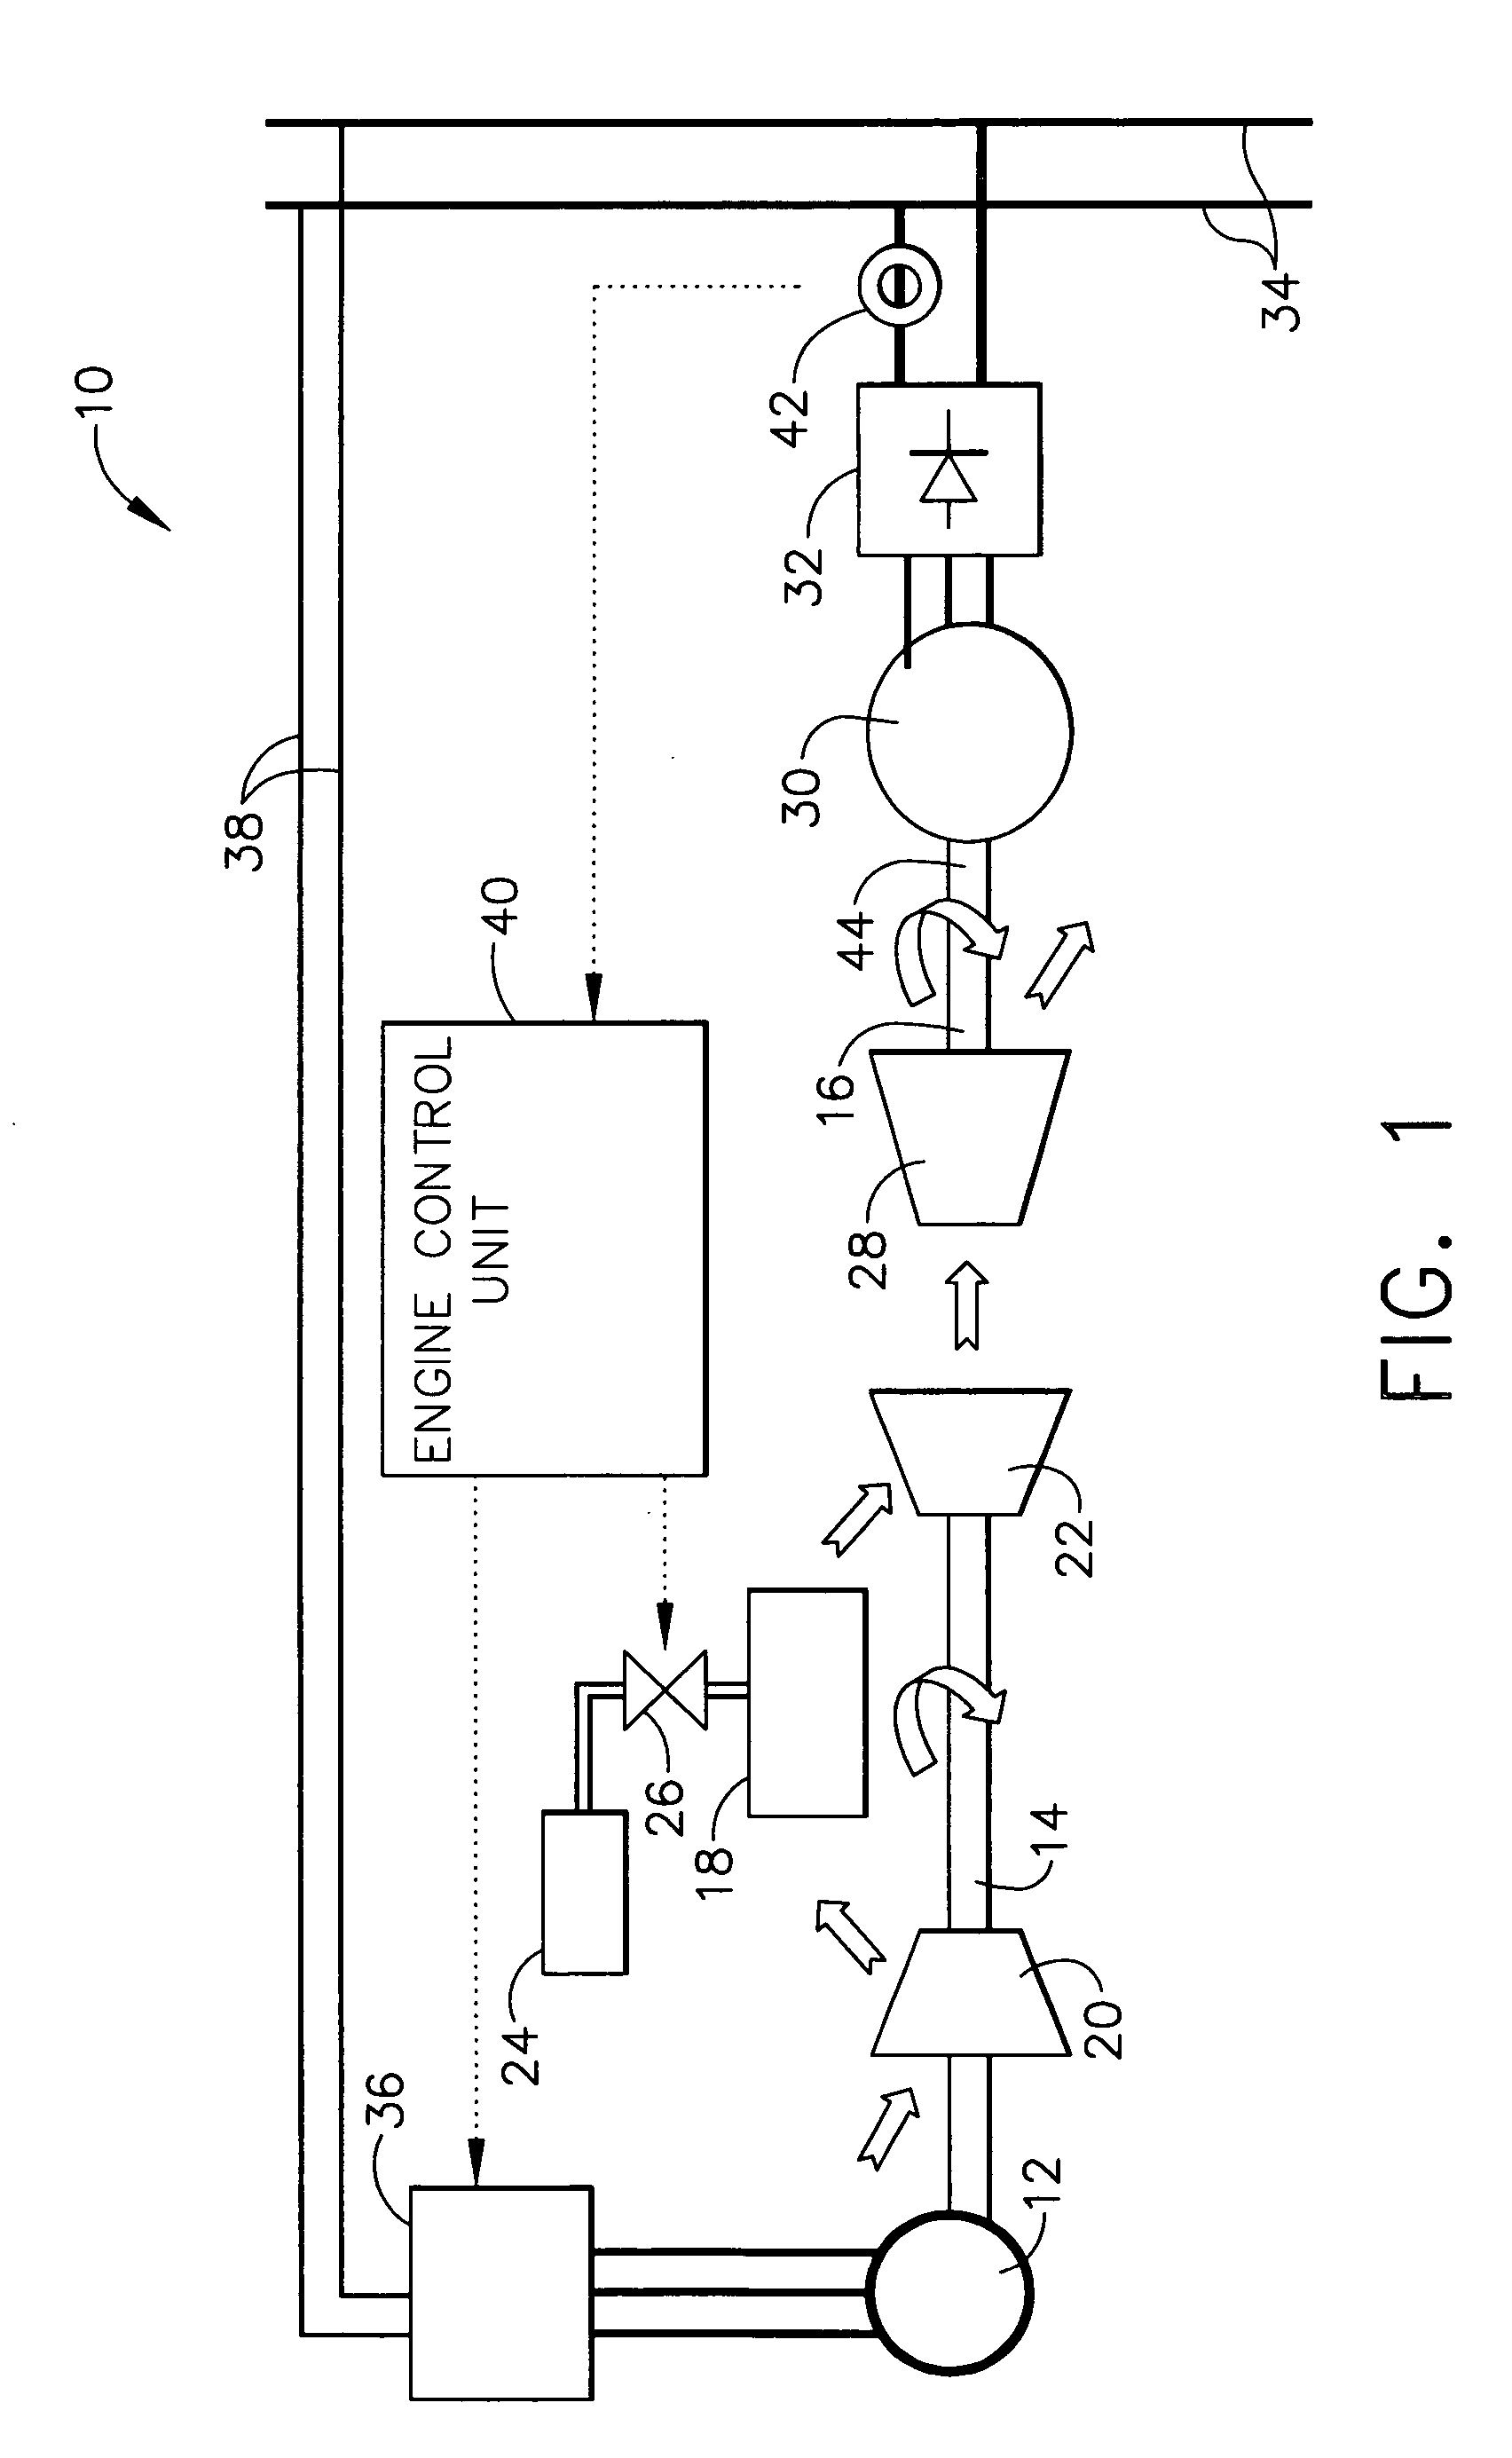 Starting and controlling speed of a two spool gas turbine engine